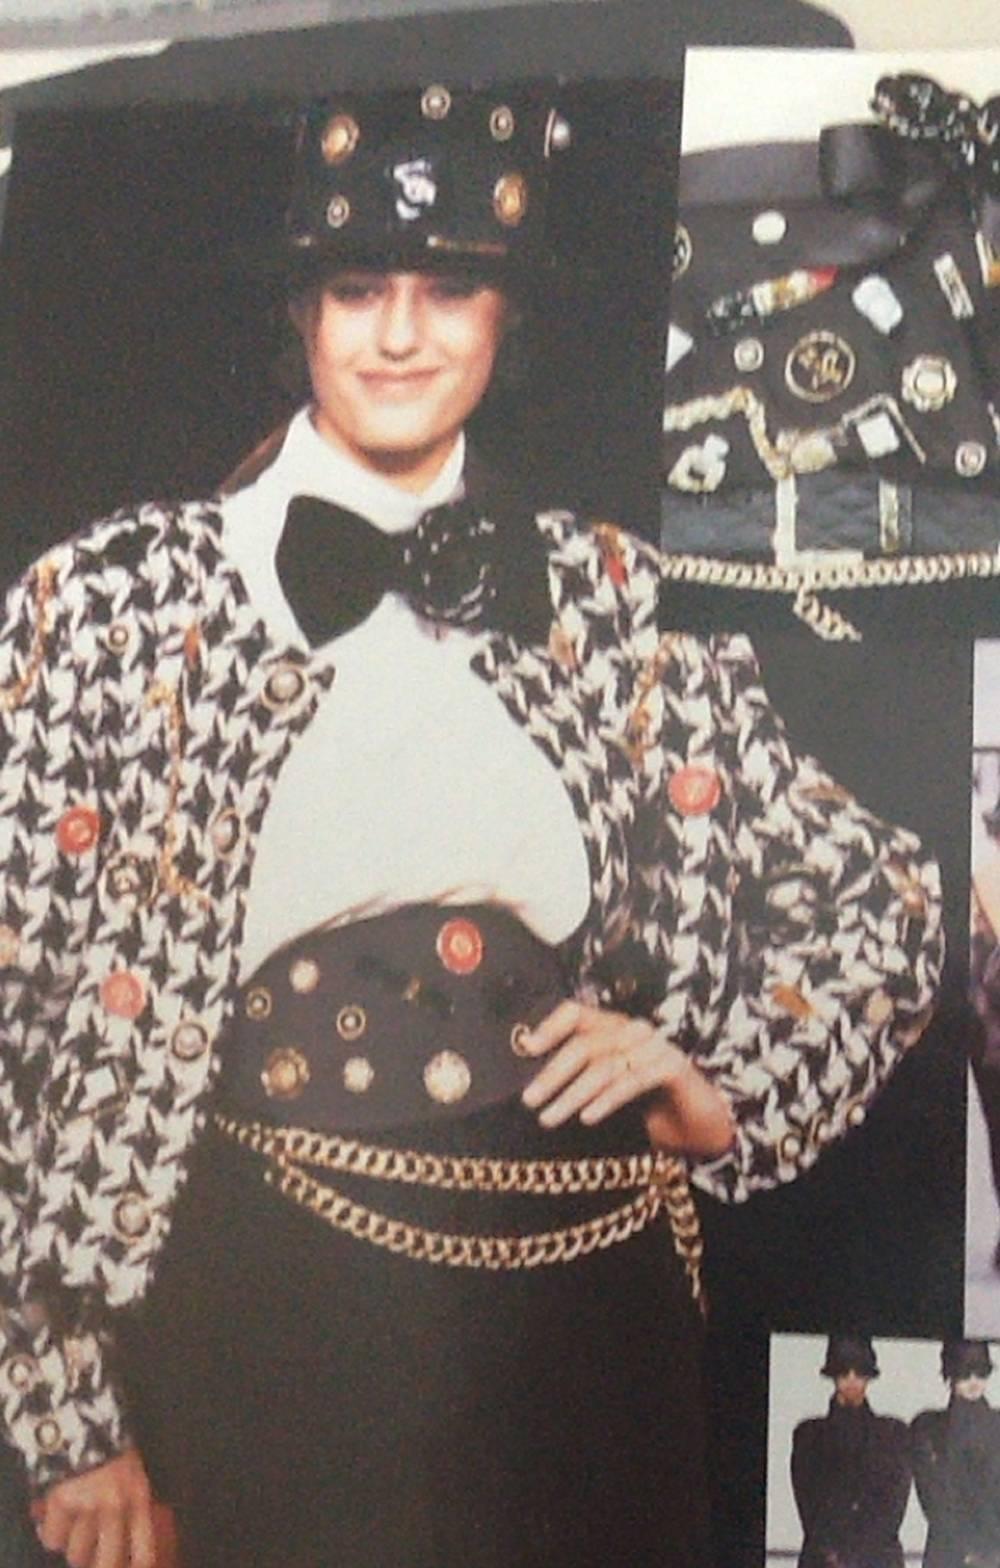 80's Rare Chanel jacket with jewel appliques and embroidered details.
This iconic Chanel jacket, in black and white houndstooth pattern, is embellished with elaborate hand-embroidery. All over  small motifs created with appliquéd red leather and